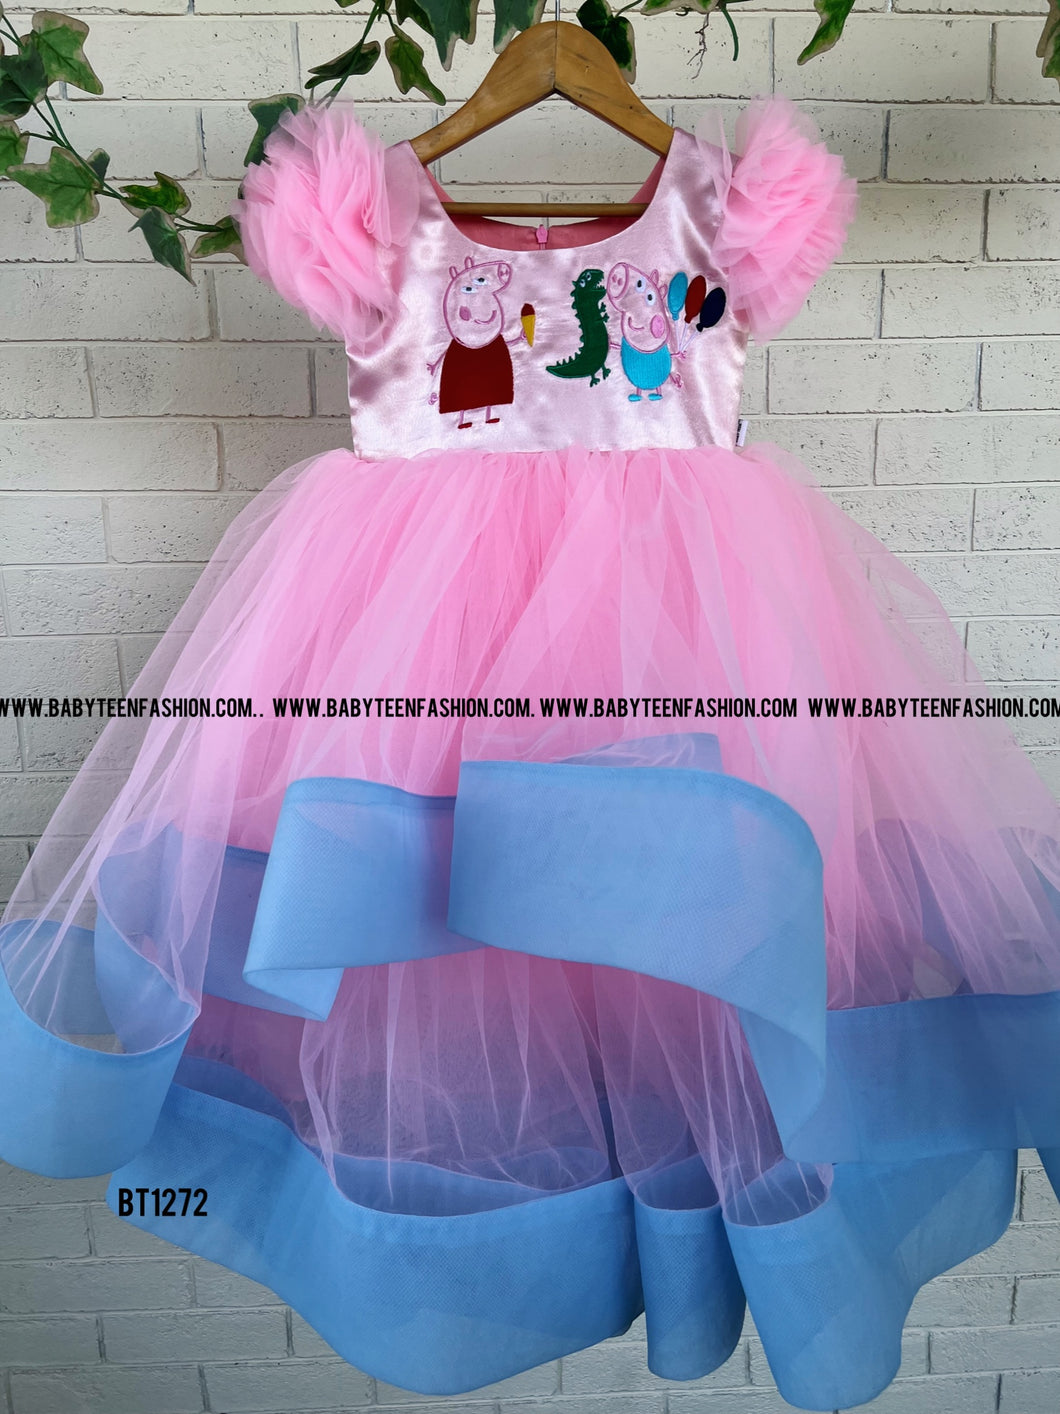 BT1272 Candy Floss Fantasy – Whimsical Character Dress